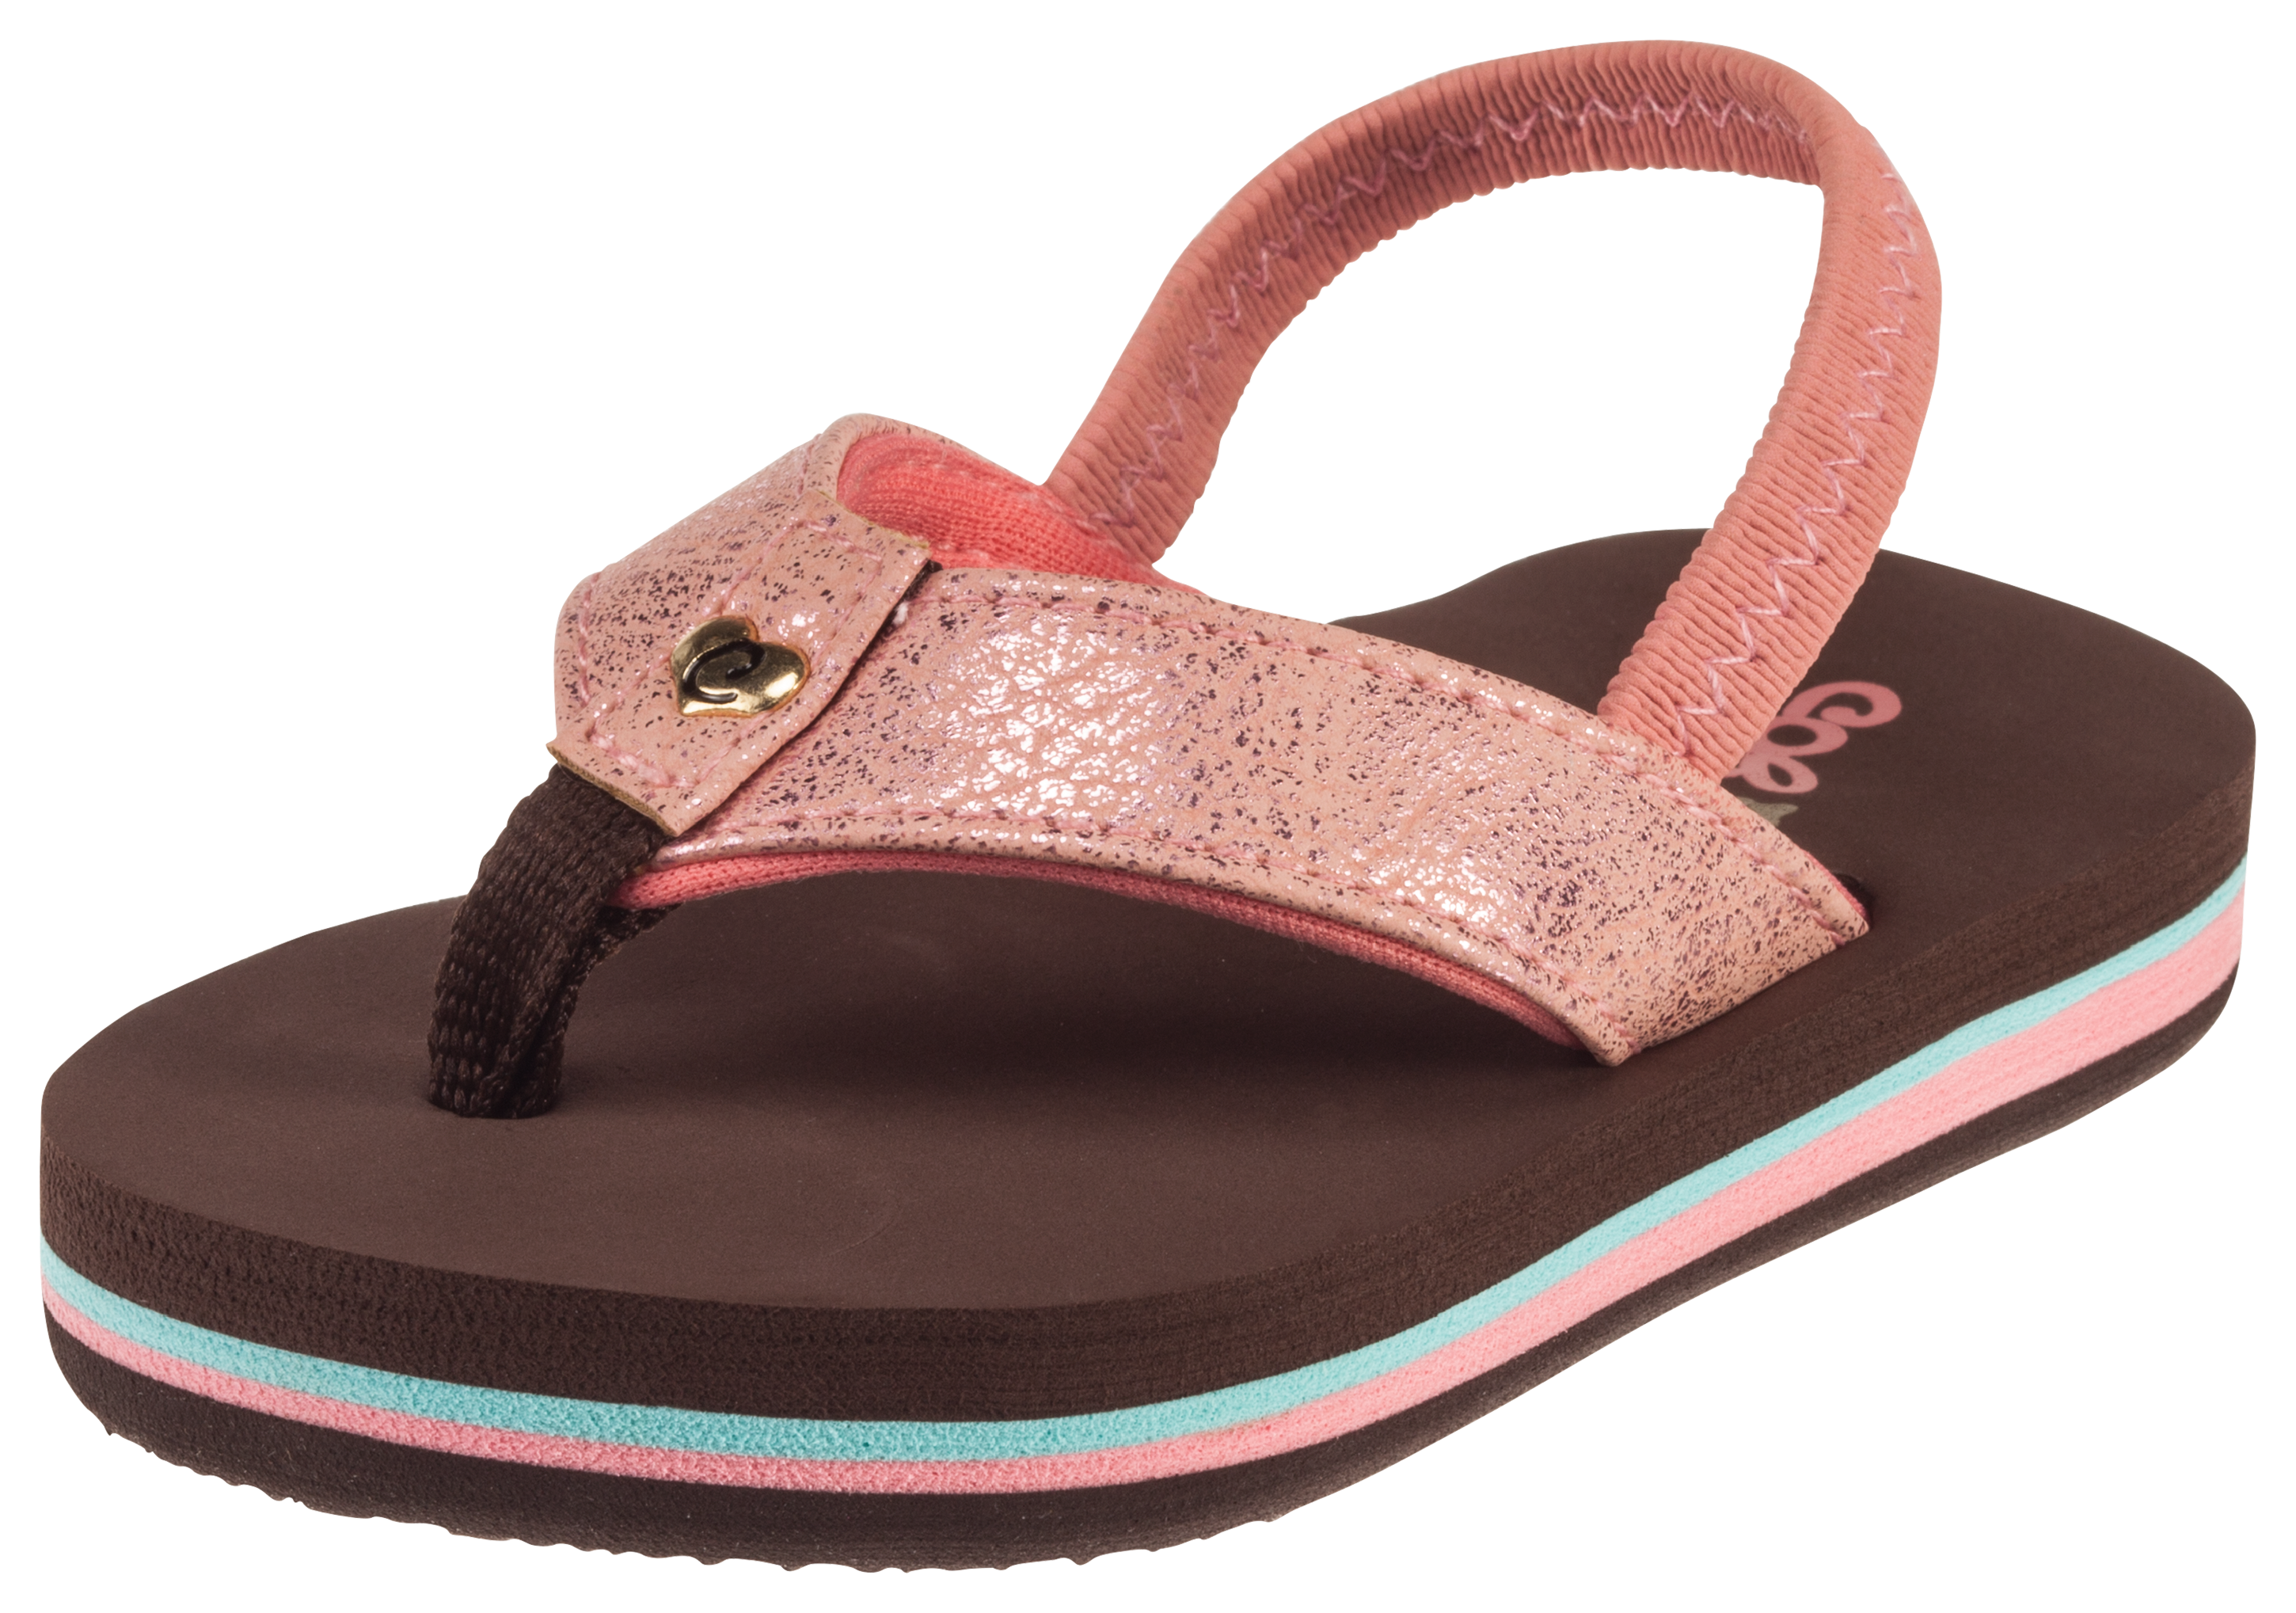 Cobian Wahine Sandals for Infants or Toddlers | Bass Pro Shops